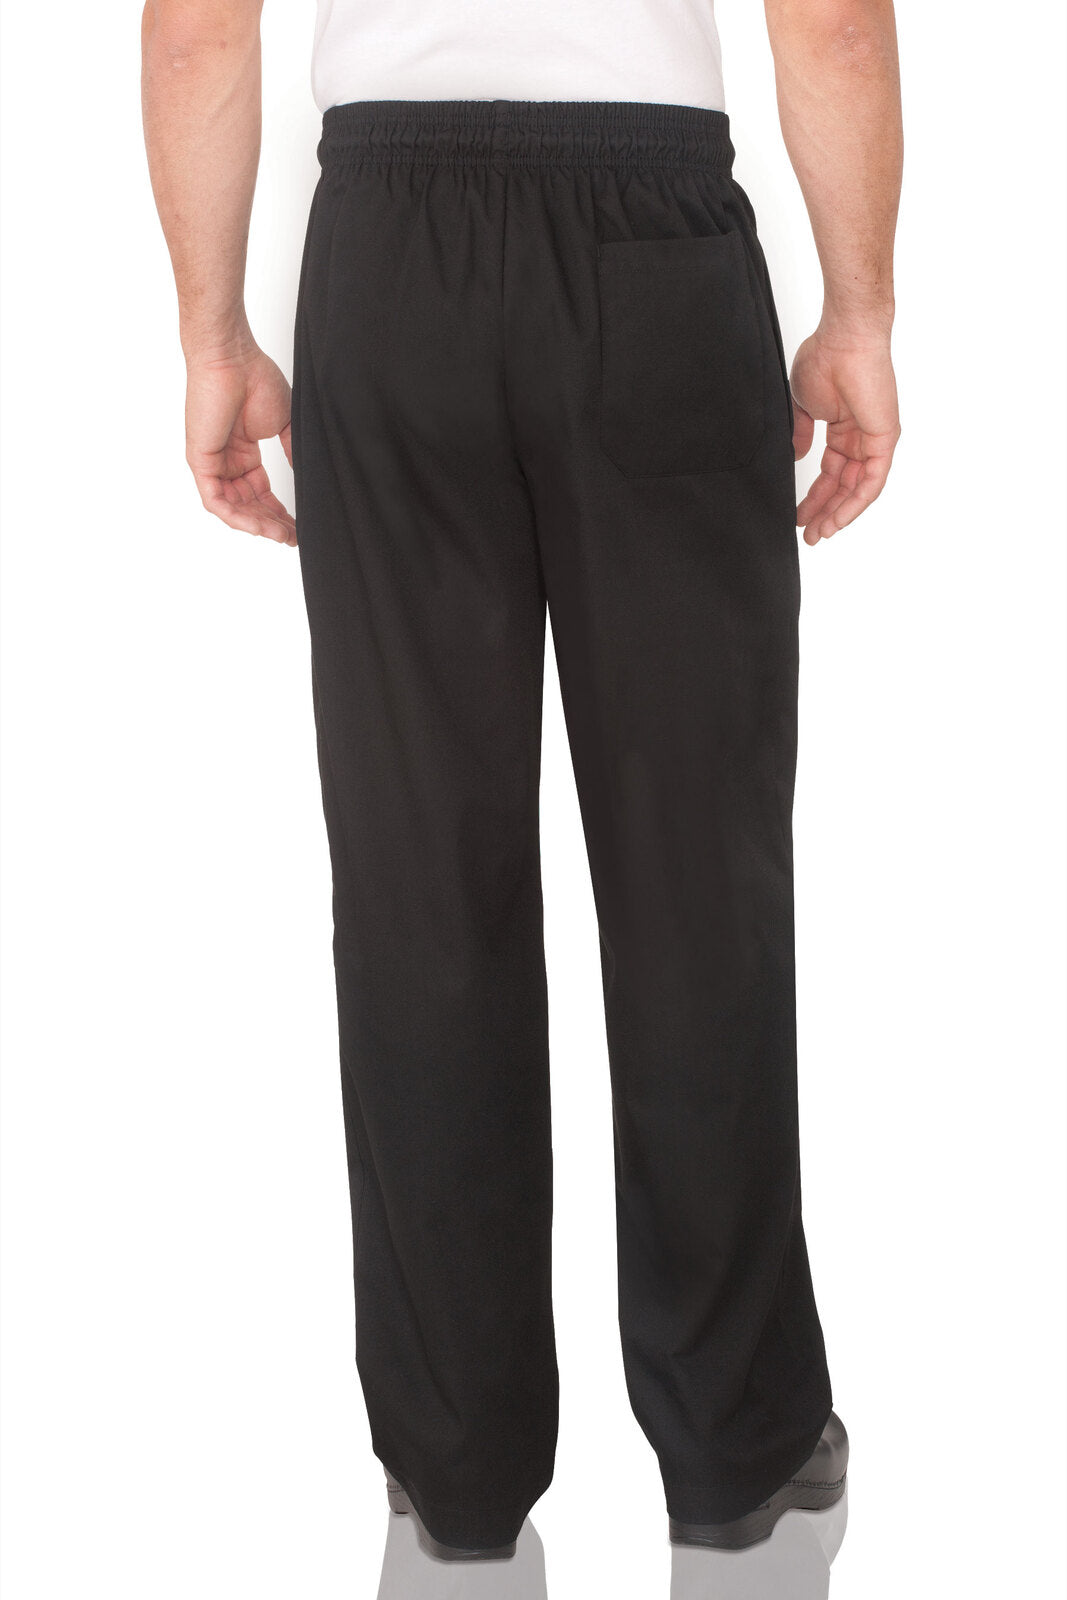 Chef Works - Essential Baggy Chef Pants - Black